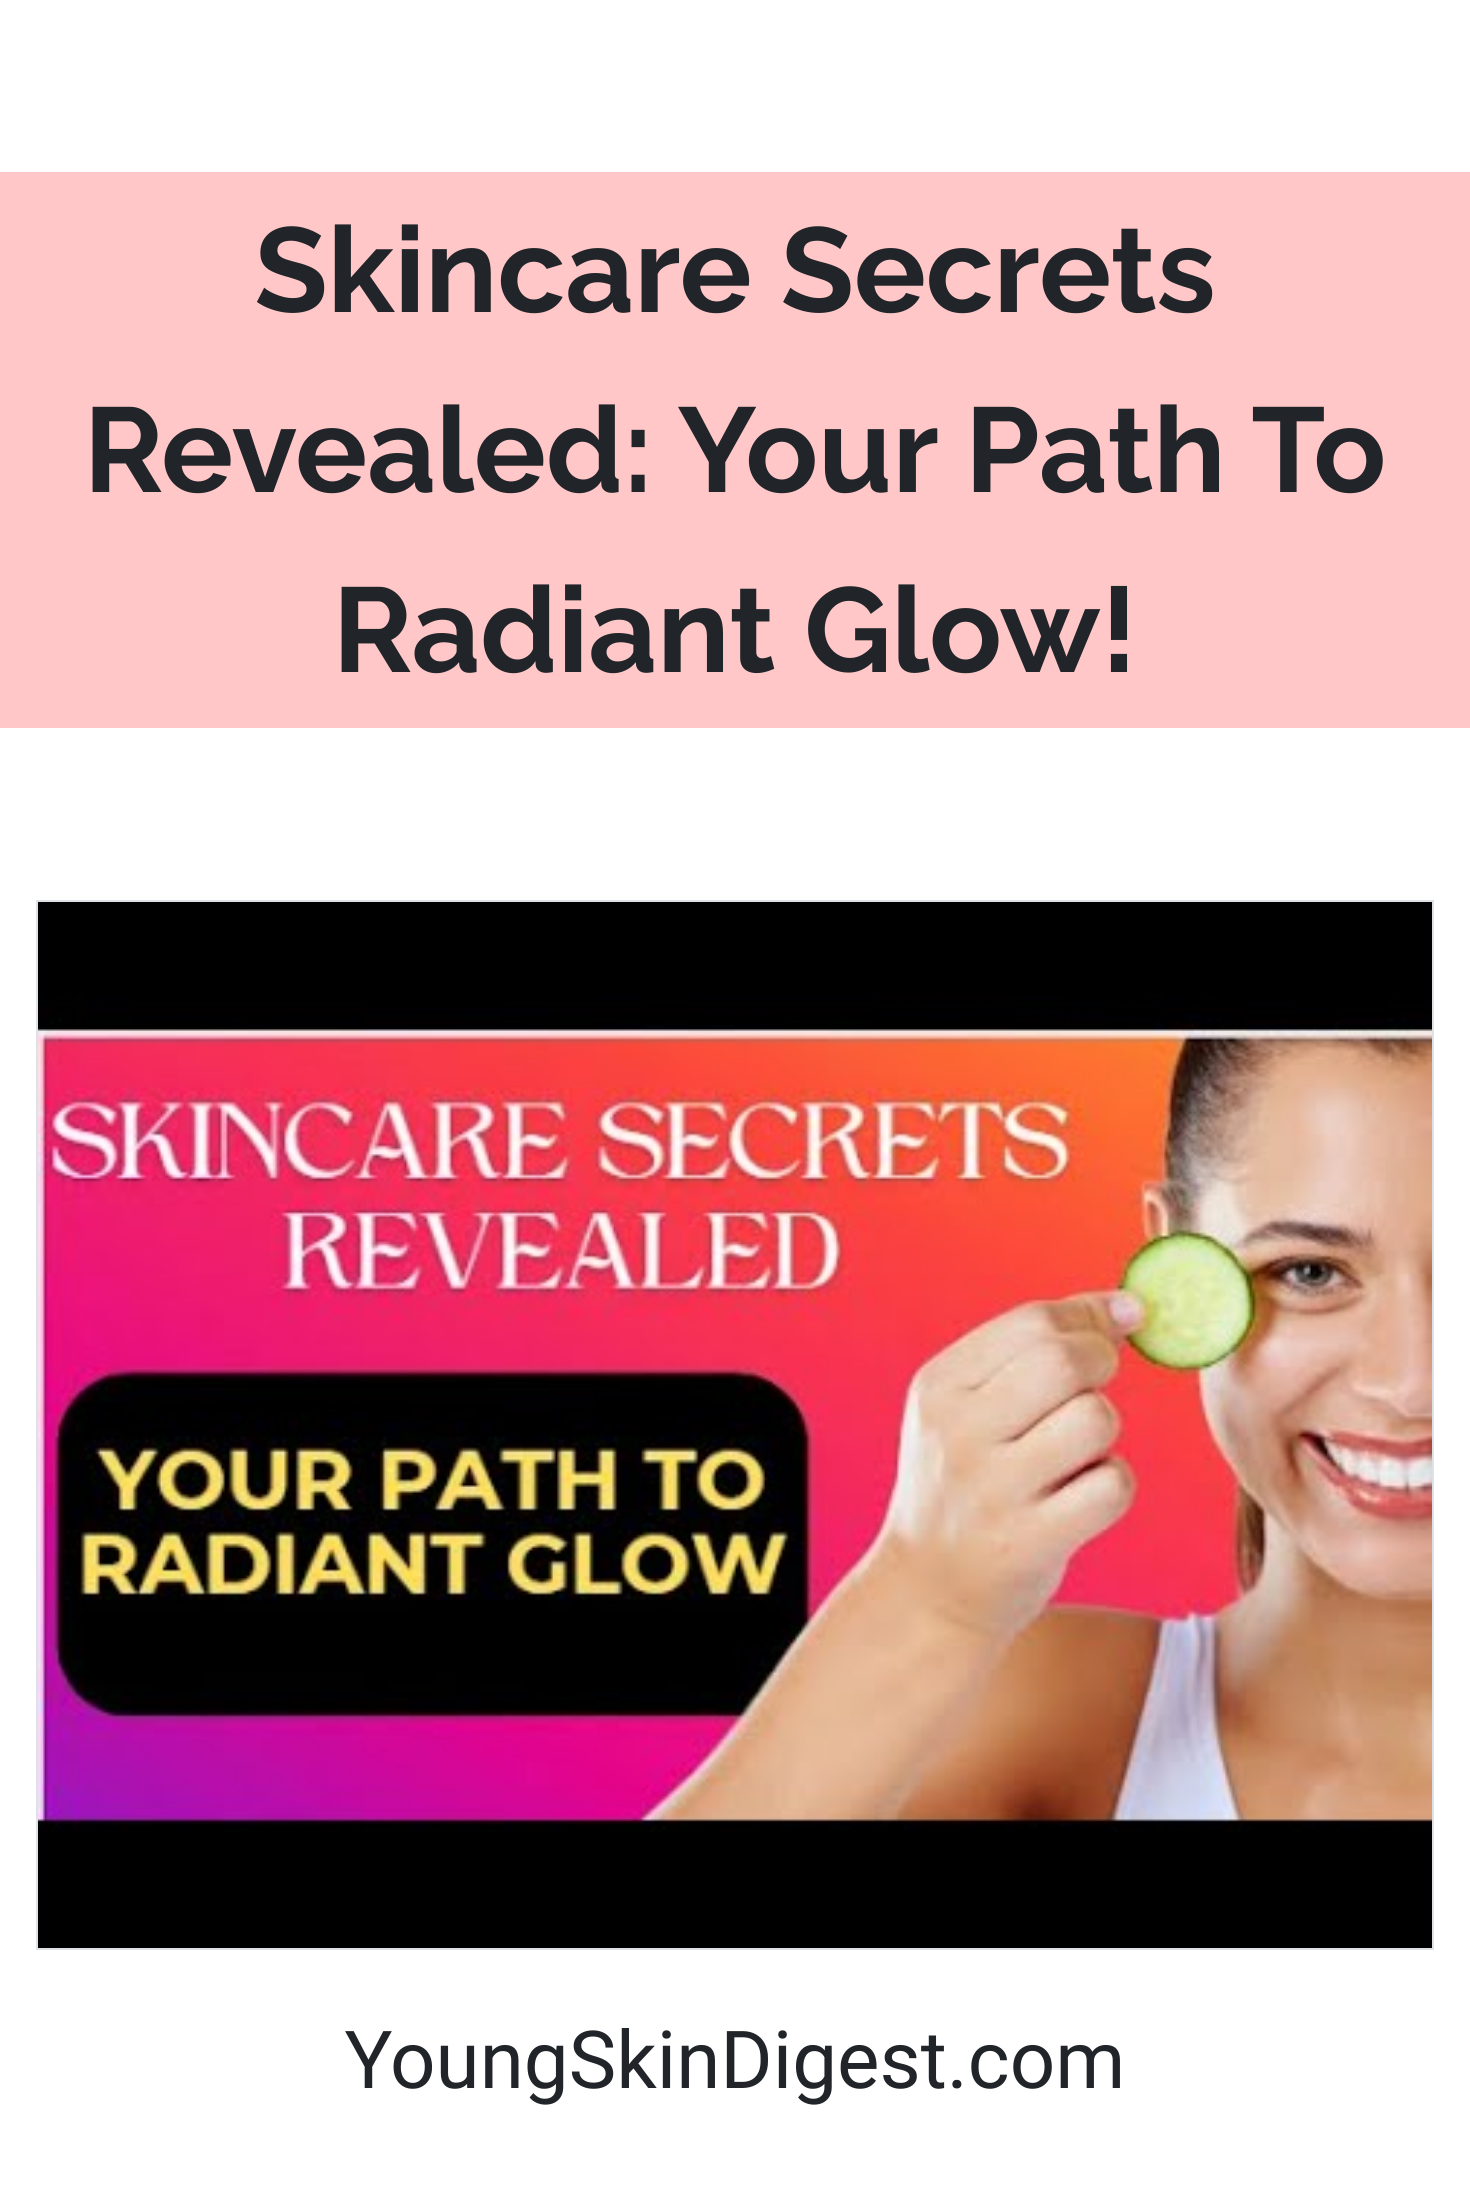 Skincare Secrets Revealed: Your Path To Radiant Glow! - Young Skin Digest